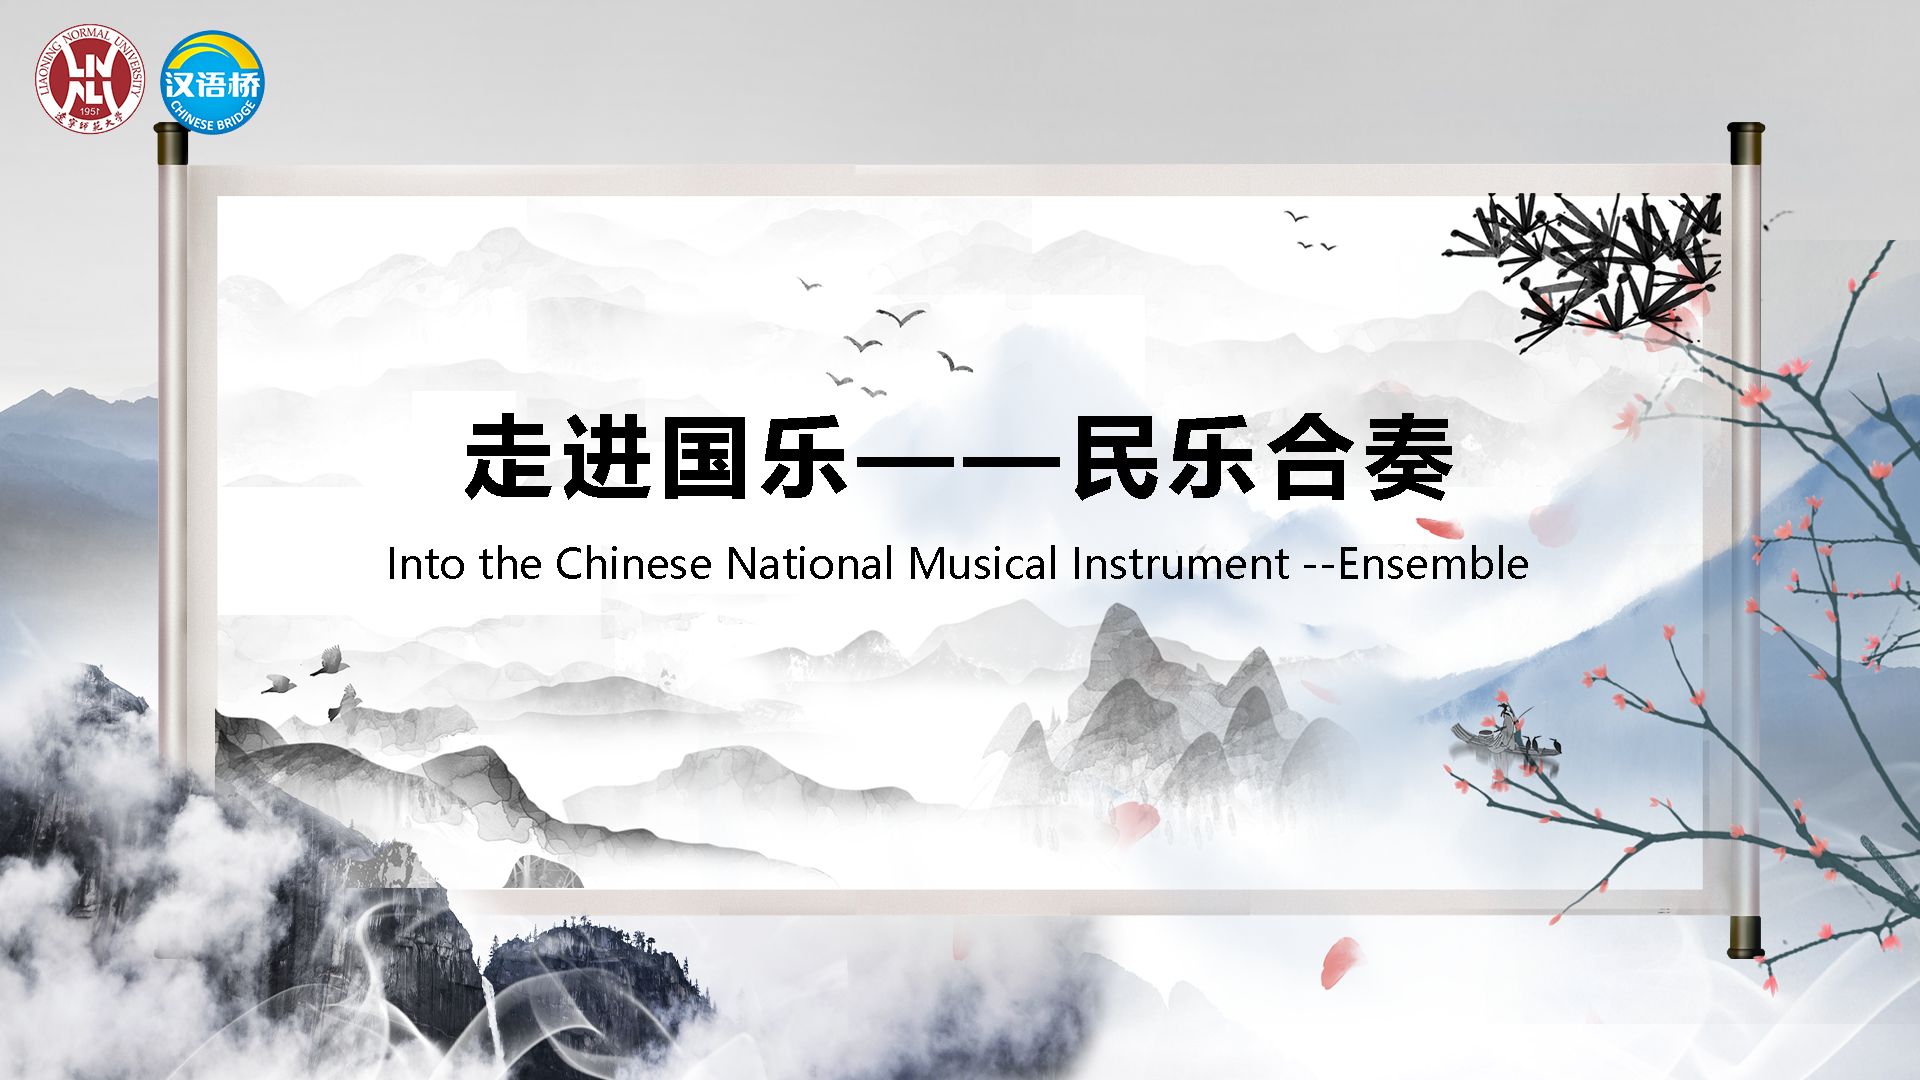 Into the Chinese National Musical Instrument --Ensemble